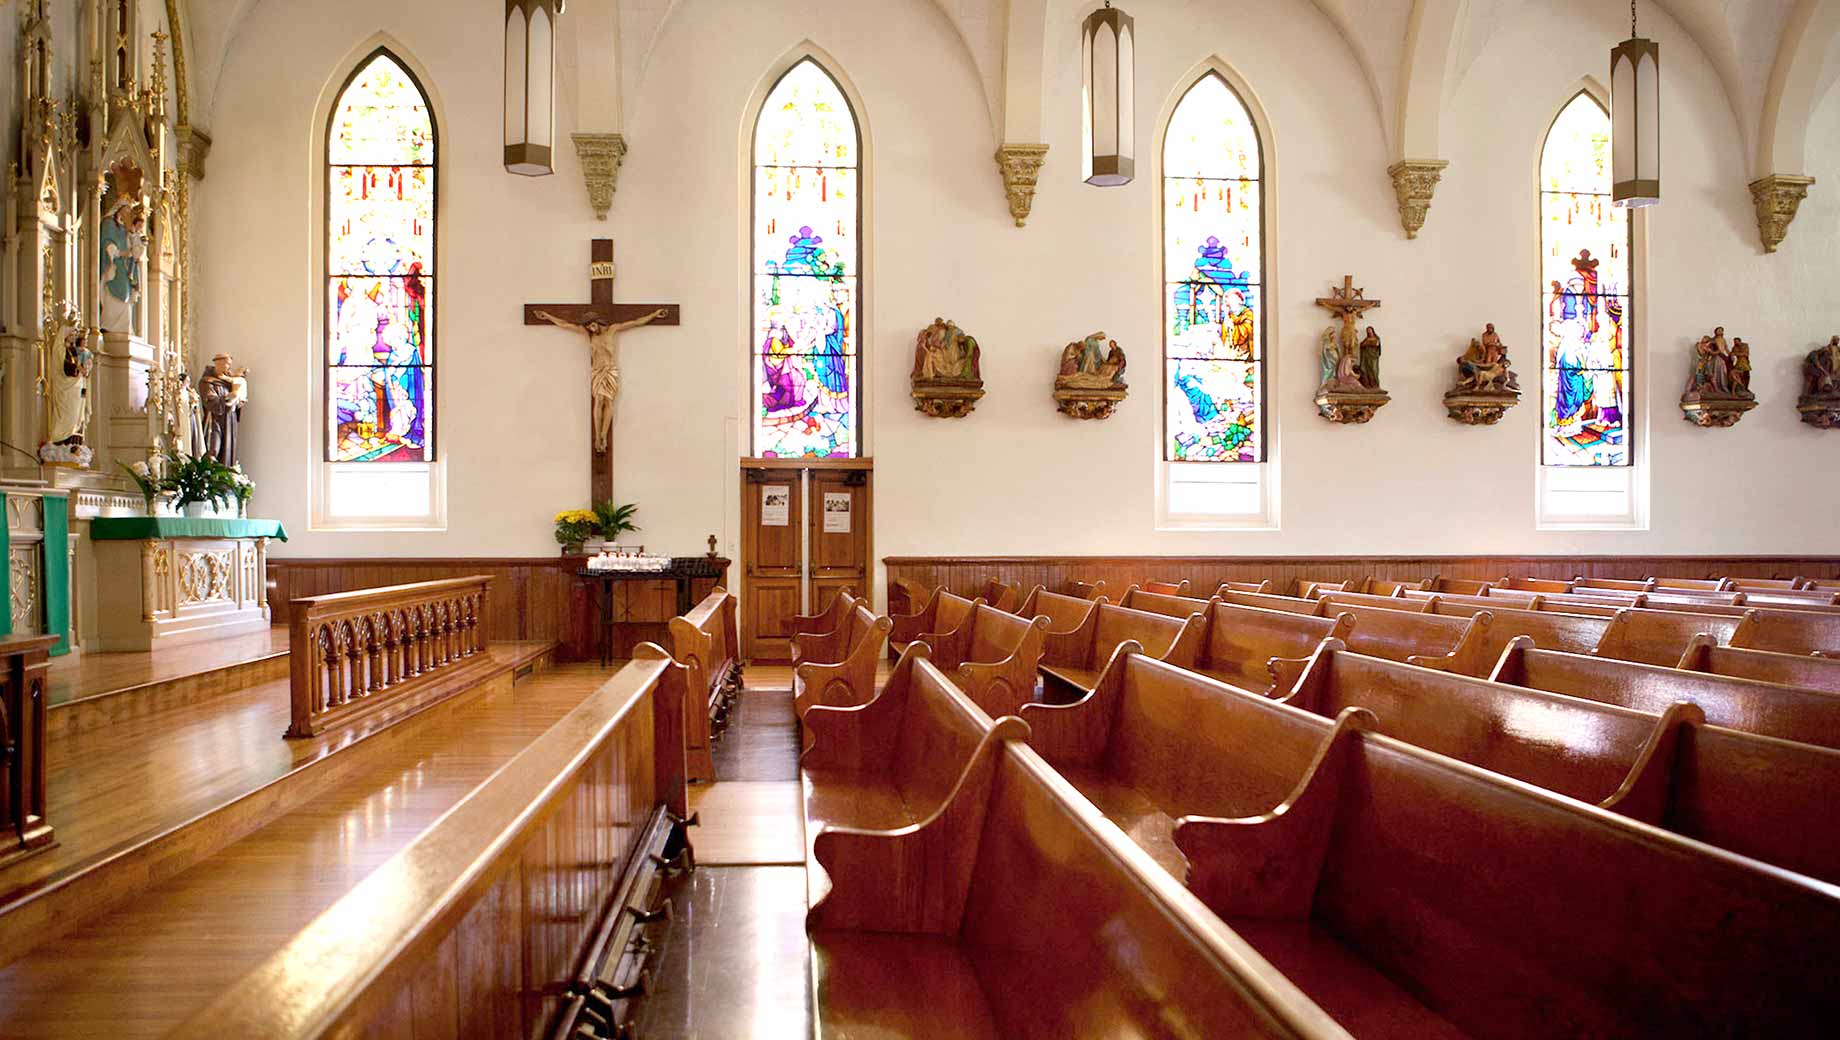 An inside view of the church that contains brown wooden benches